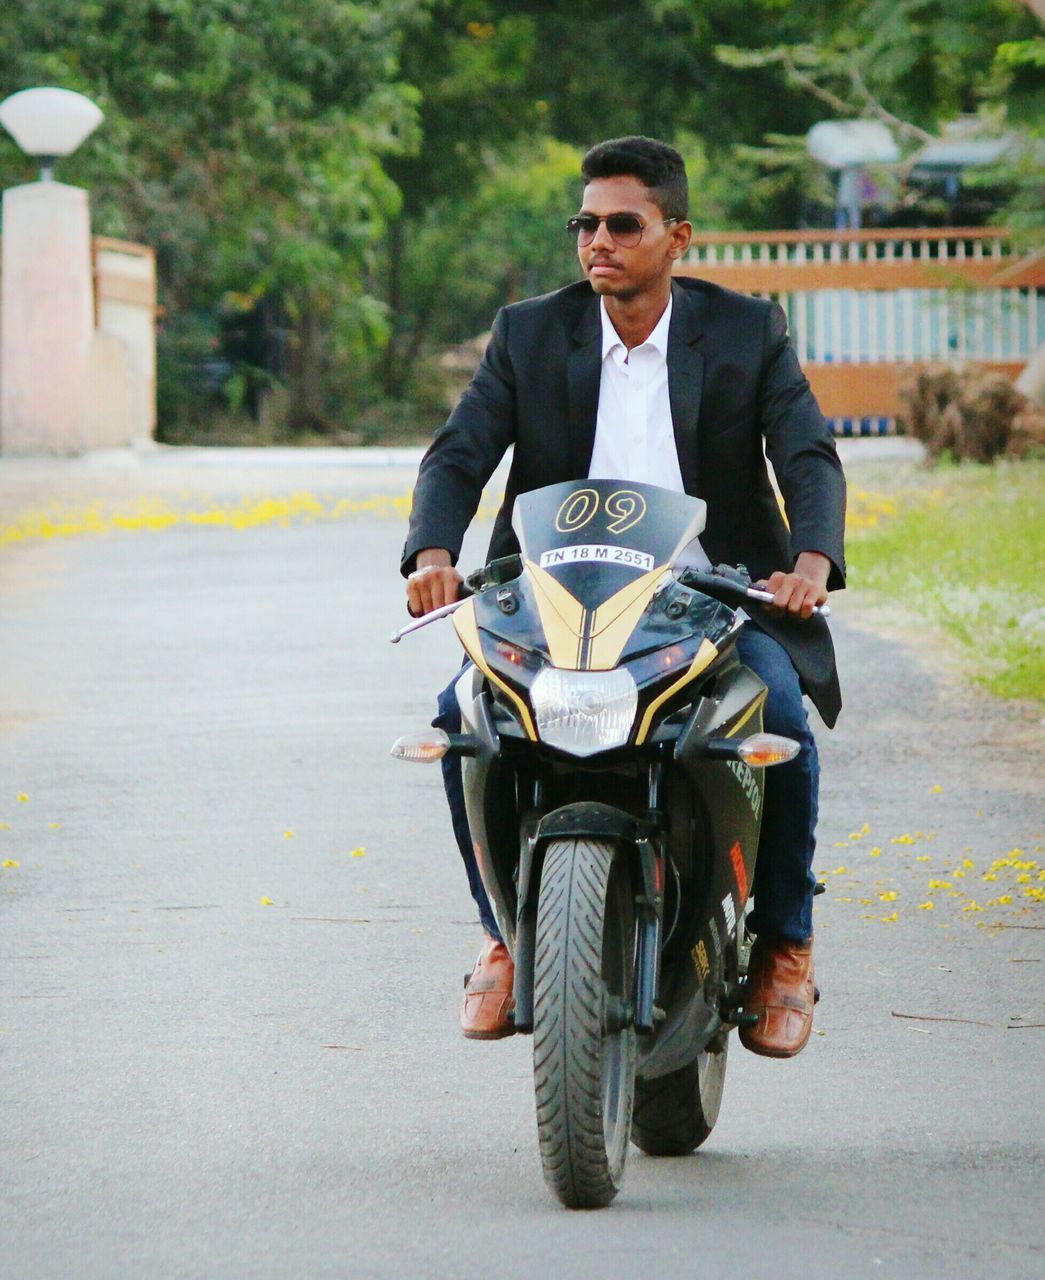 one man only, only men, road, full length, outdoors, front view, travel, fashion, sunglasses, transportation, one person, adults only, suit, day, motorcycle, city, men, well-dressed, adult, young adult, people